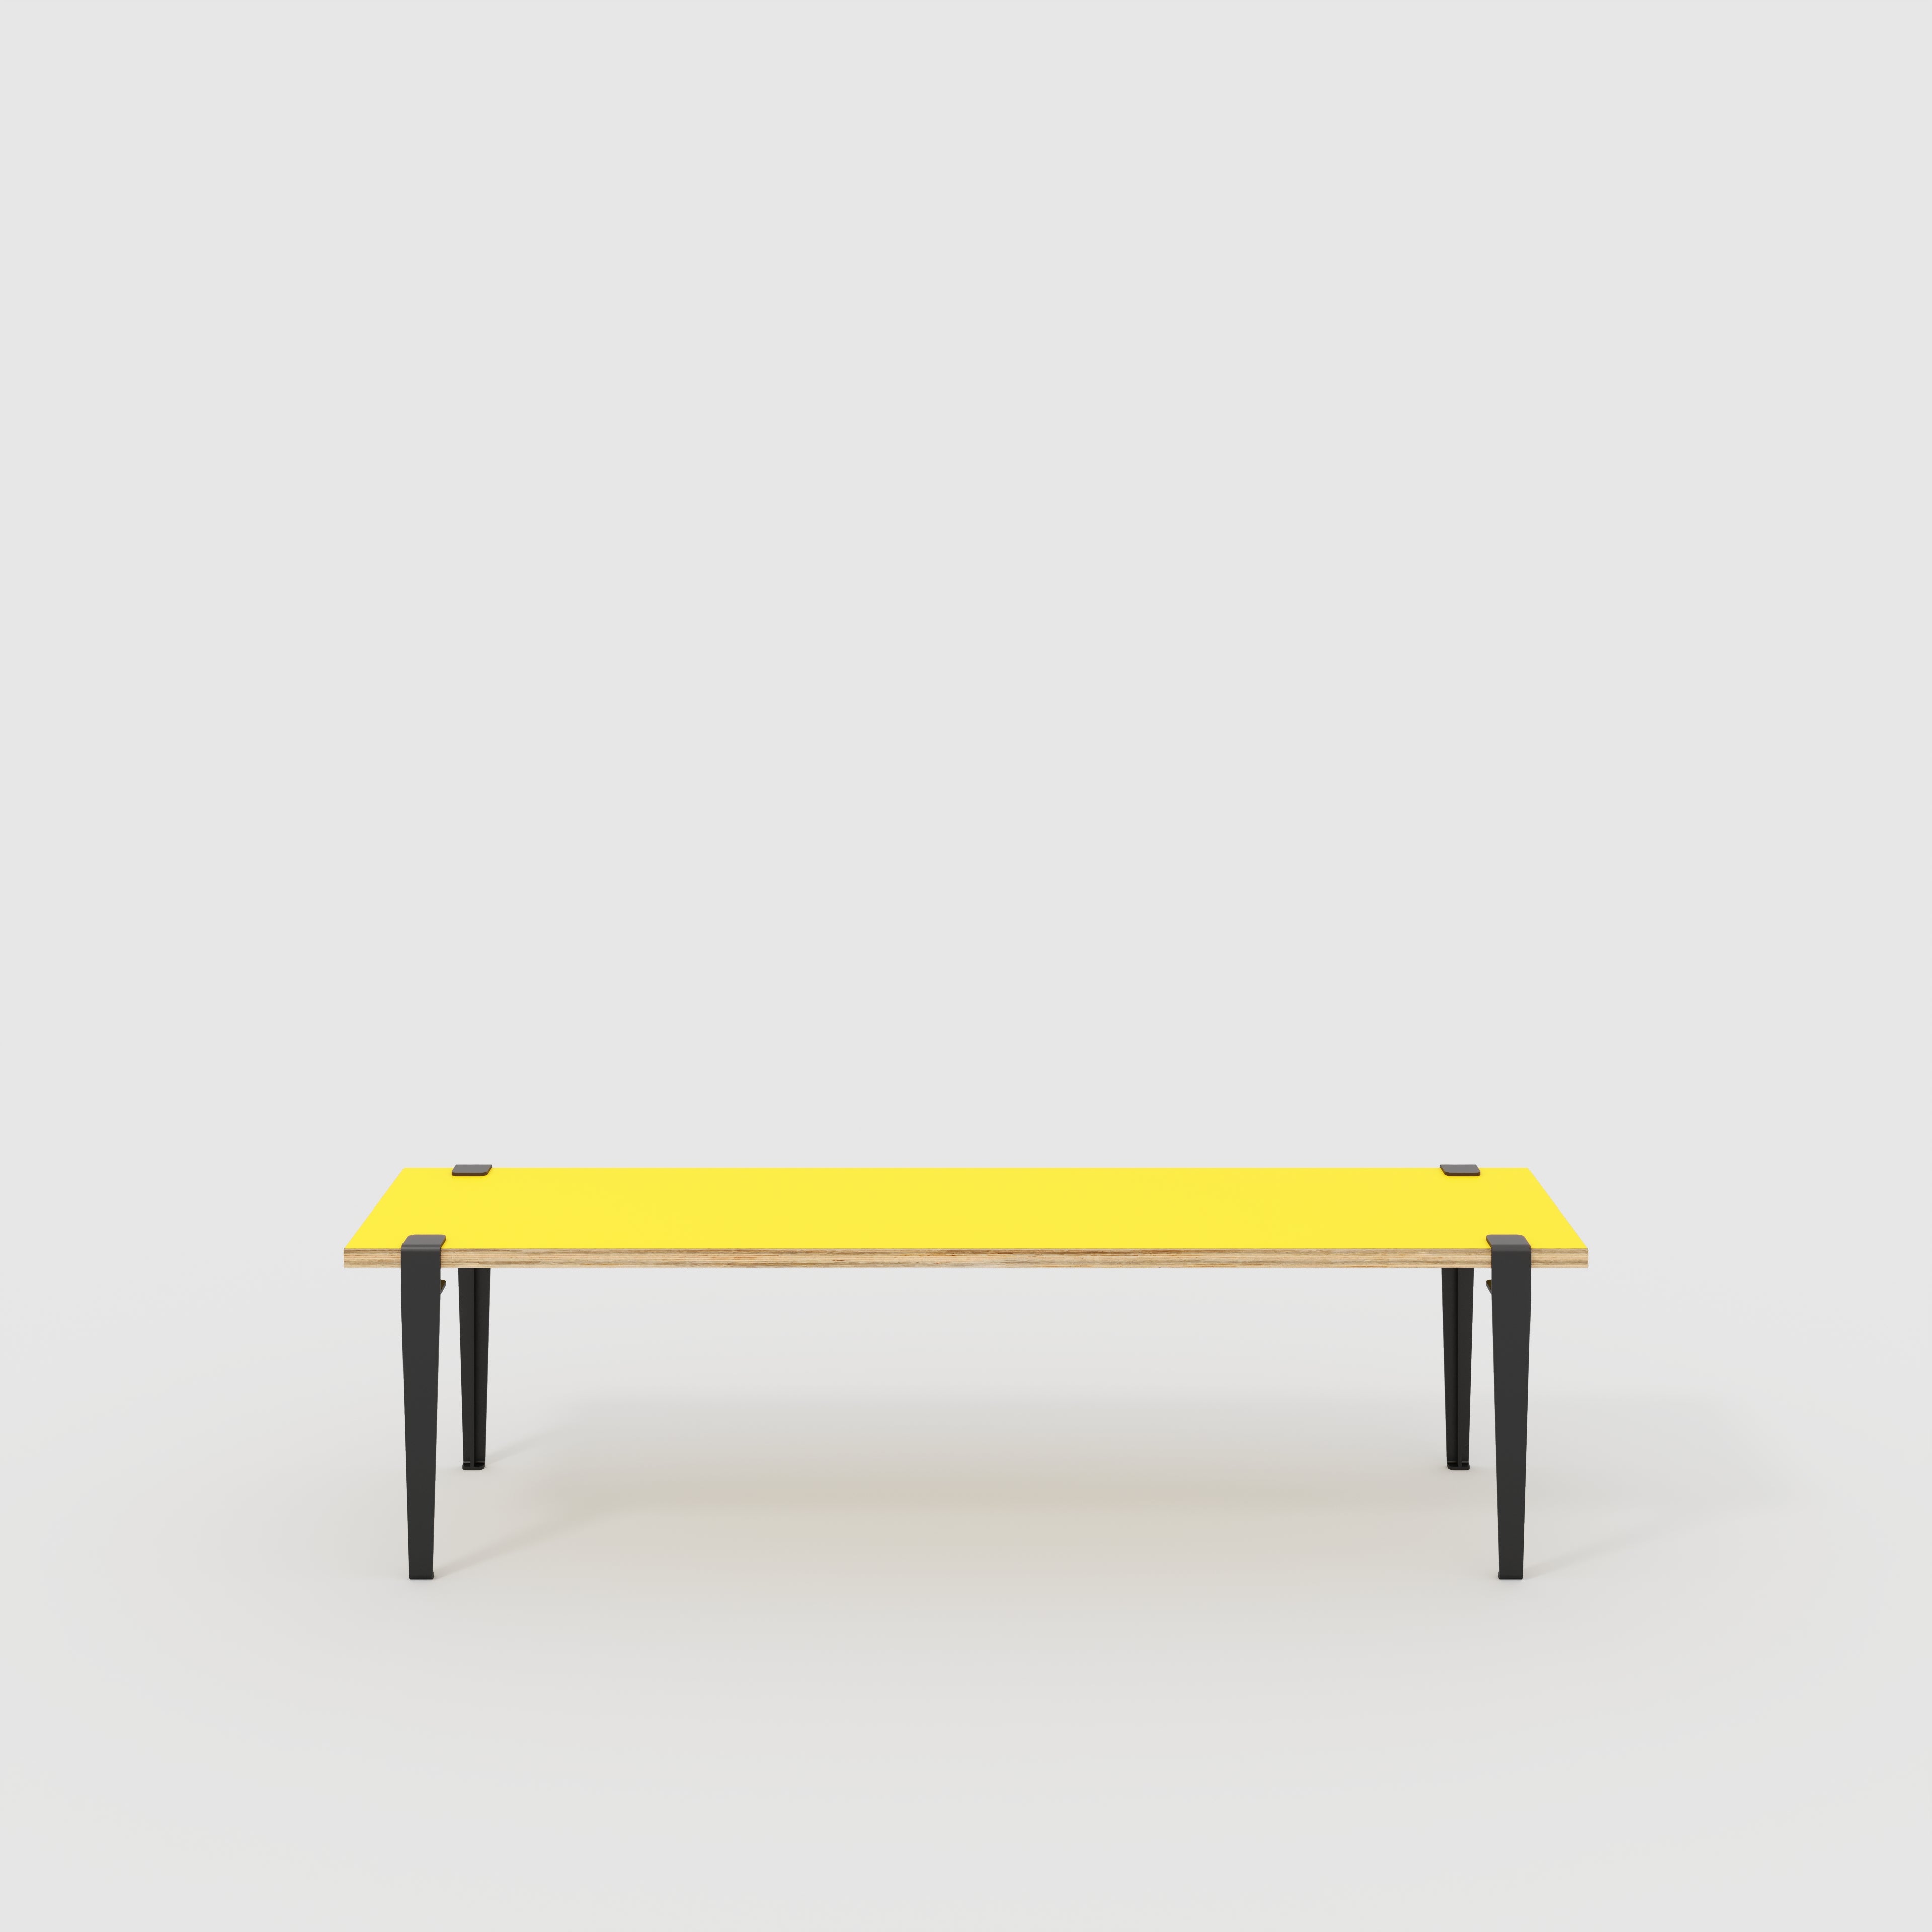 Bench Seat with Black Tiptoe Legs - Formica Chrome Yellow - 1600(w) x 400(d) x 450(h)